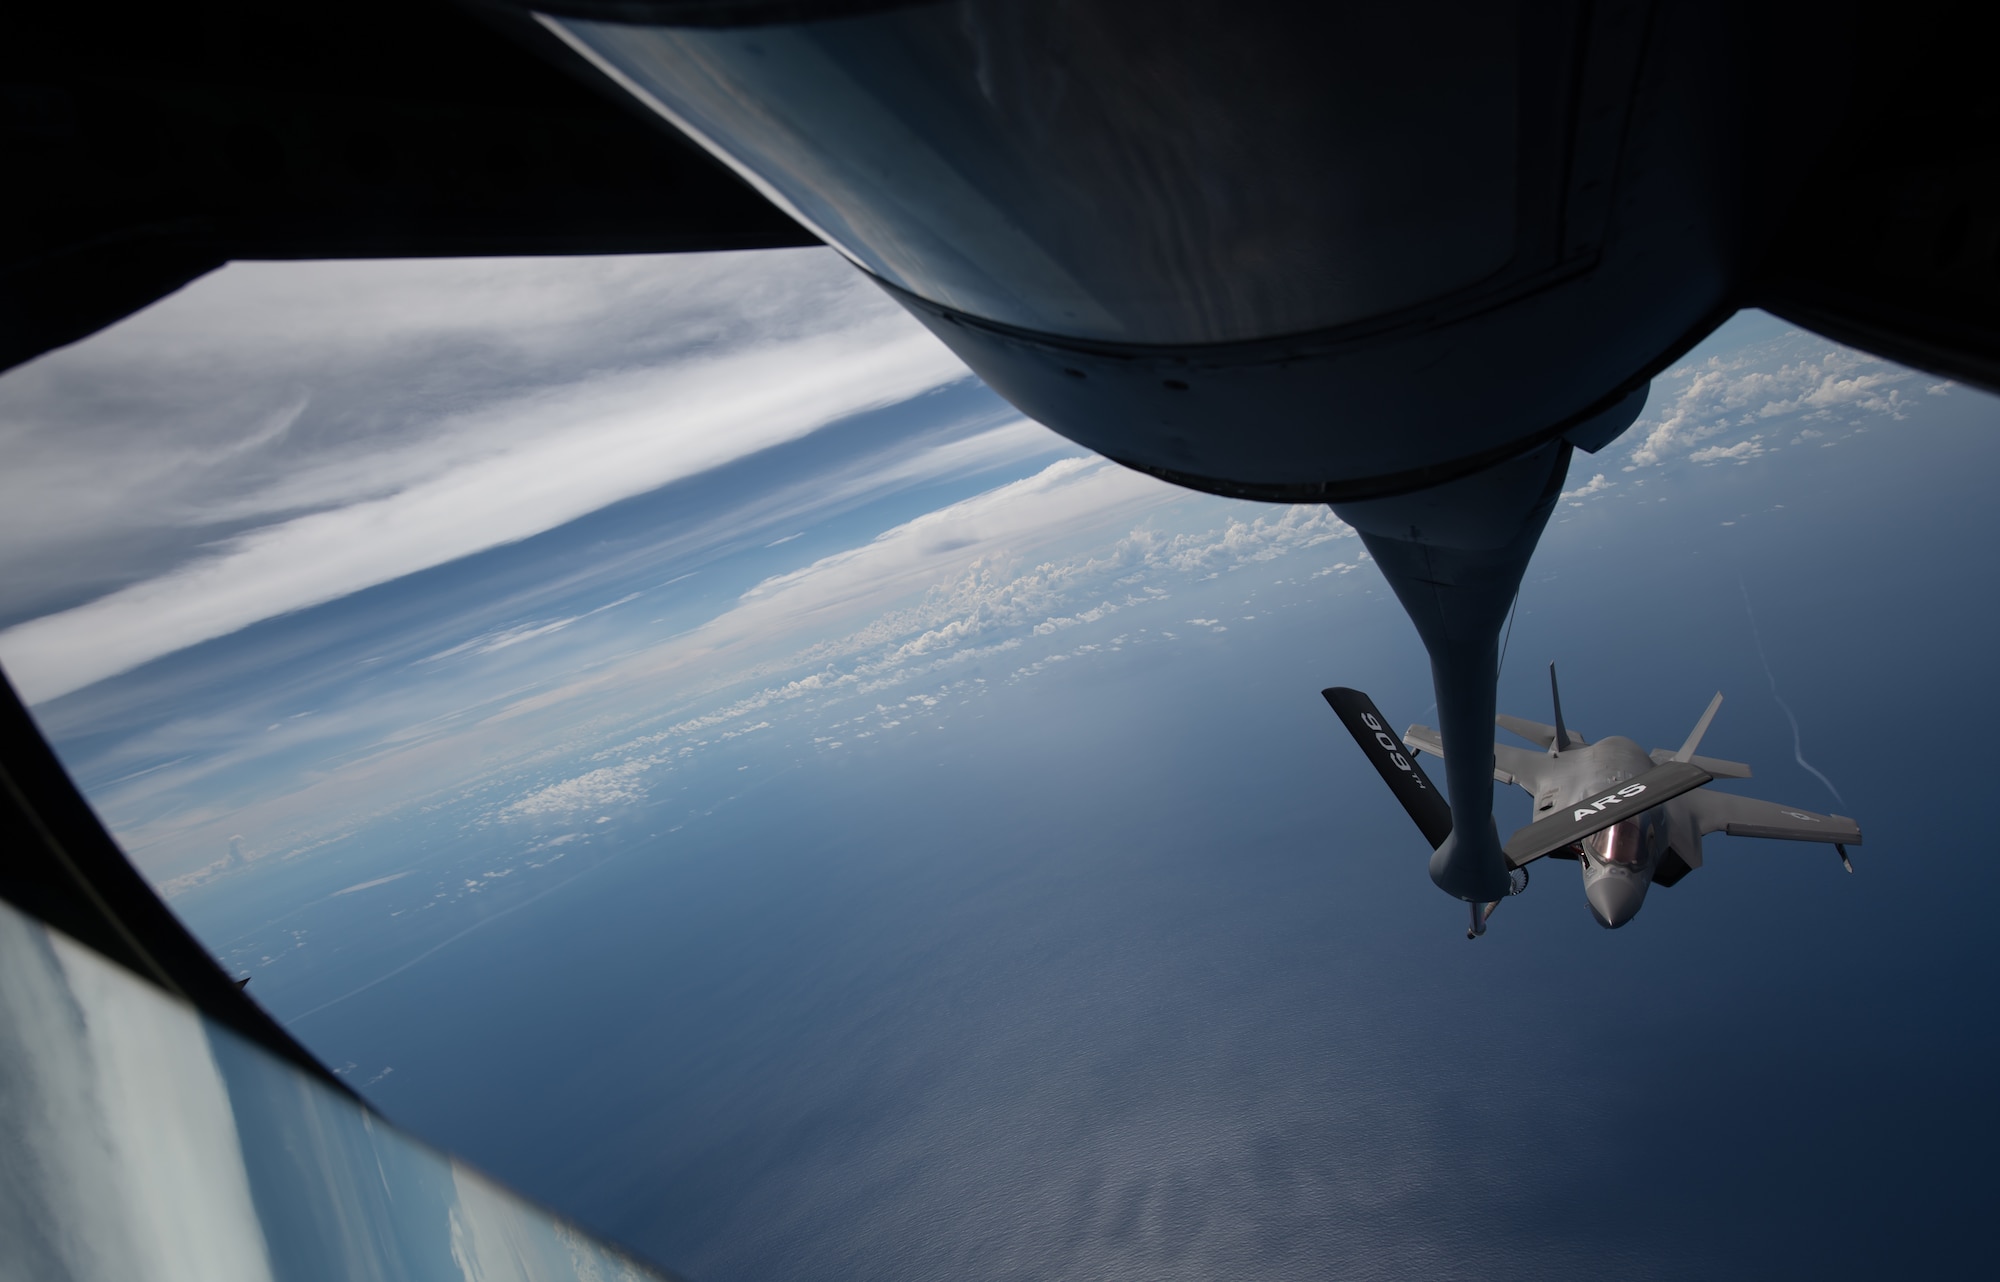 A U.S. Marine Corps F-35B Lightning II, Marine Fighter Attack Squadron based out of Marine Corps Air Station MCAS Iwakuni, Japan, flies into position to receive fuel from a KC-135 Stratotanker assigned to the 909th Air Refueling Squadron, Kadena Air Base, Japan during a Large Scale Global Exercise 21 mission over the western Pacific Ocean, Aug. 18, 2021. The U.S. has the ability to operate from the sanctuary of bases across the region and projecting sustained combat power.  (U.S. Air Force photo by Tech. Sgt. Micaiah Anthony)